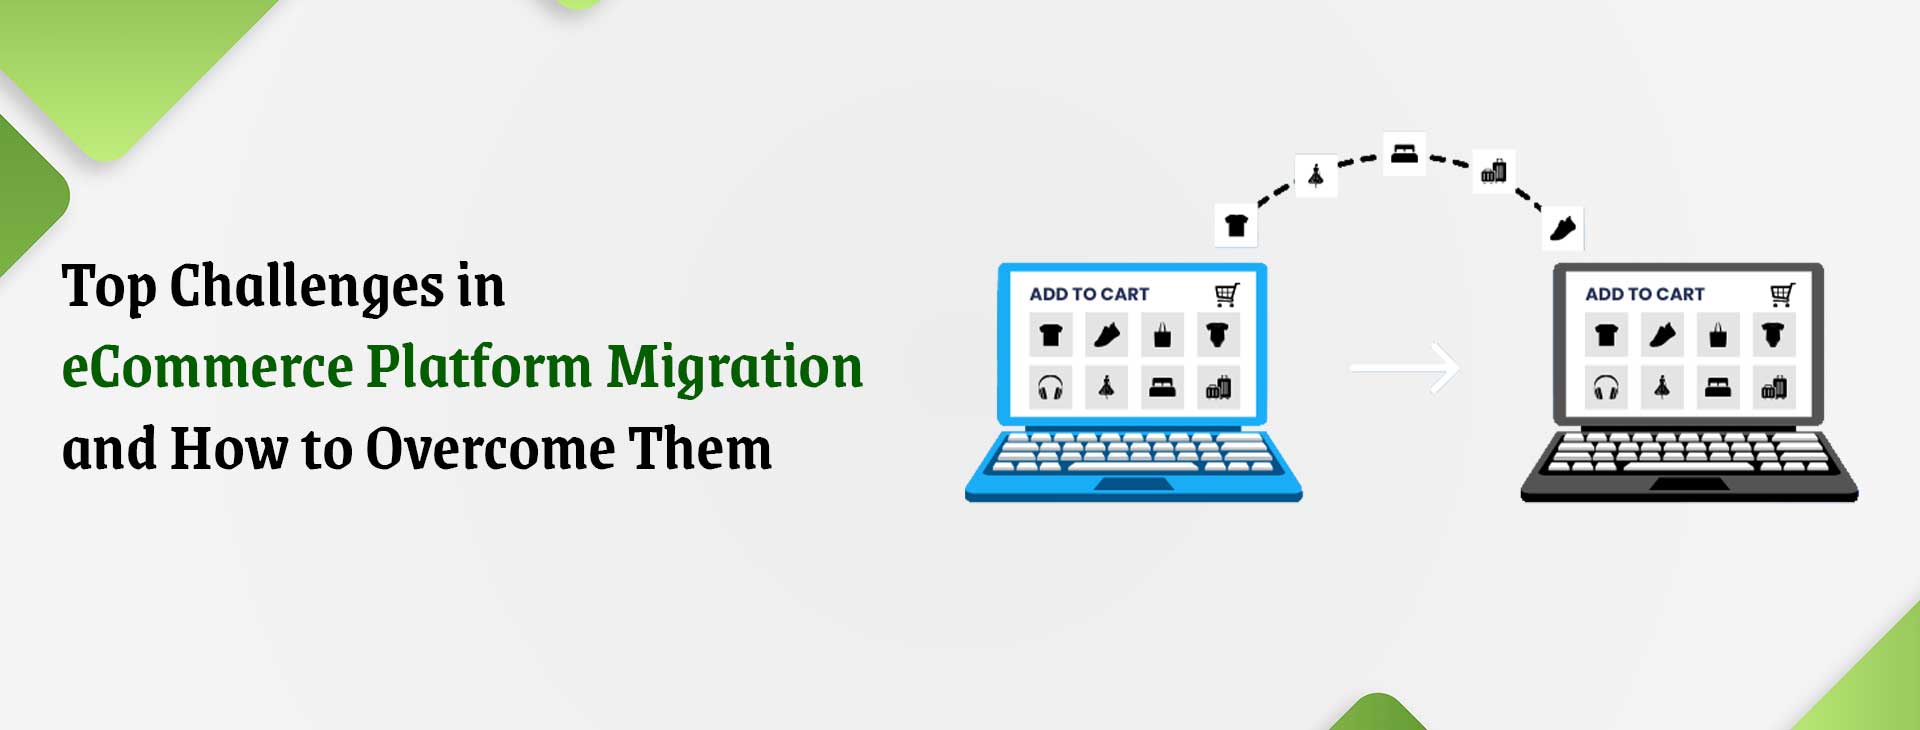 Top Challenges in eCommerce Platform Migration and How to Overcome Them